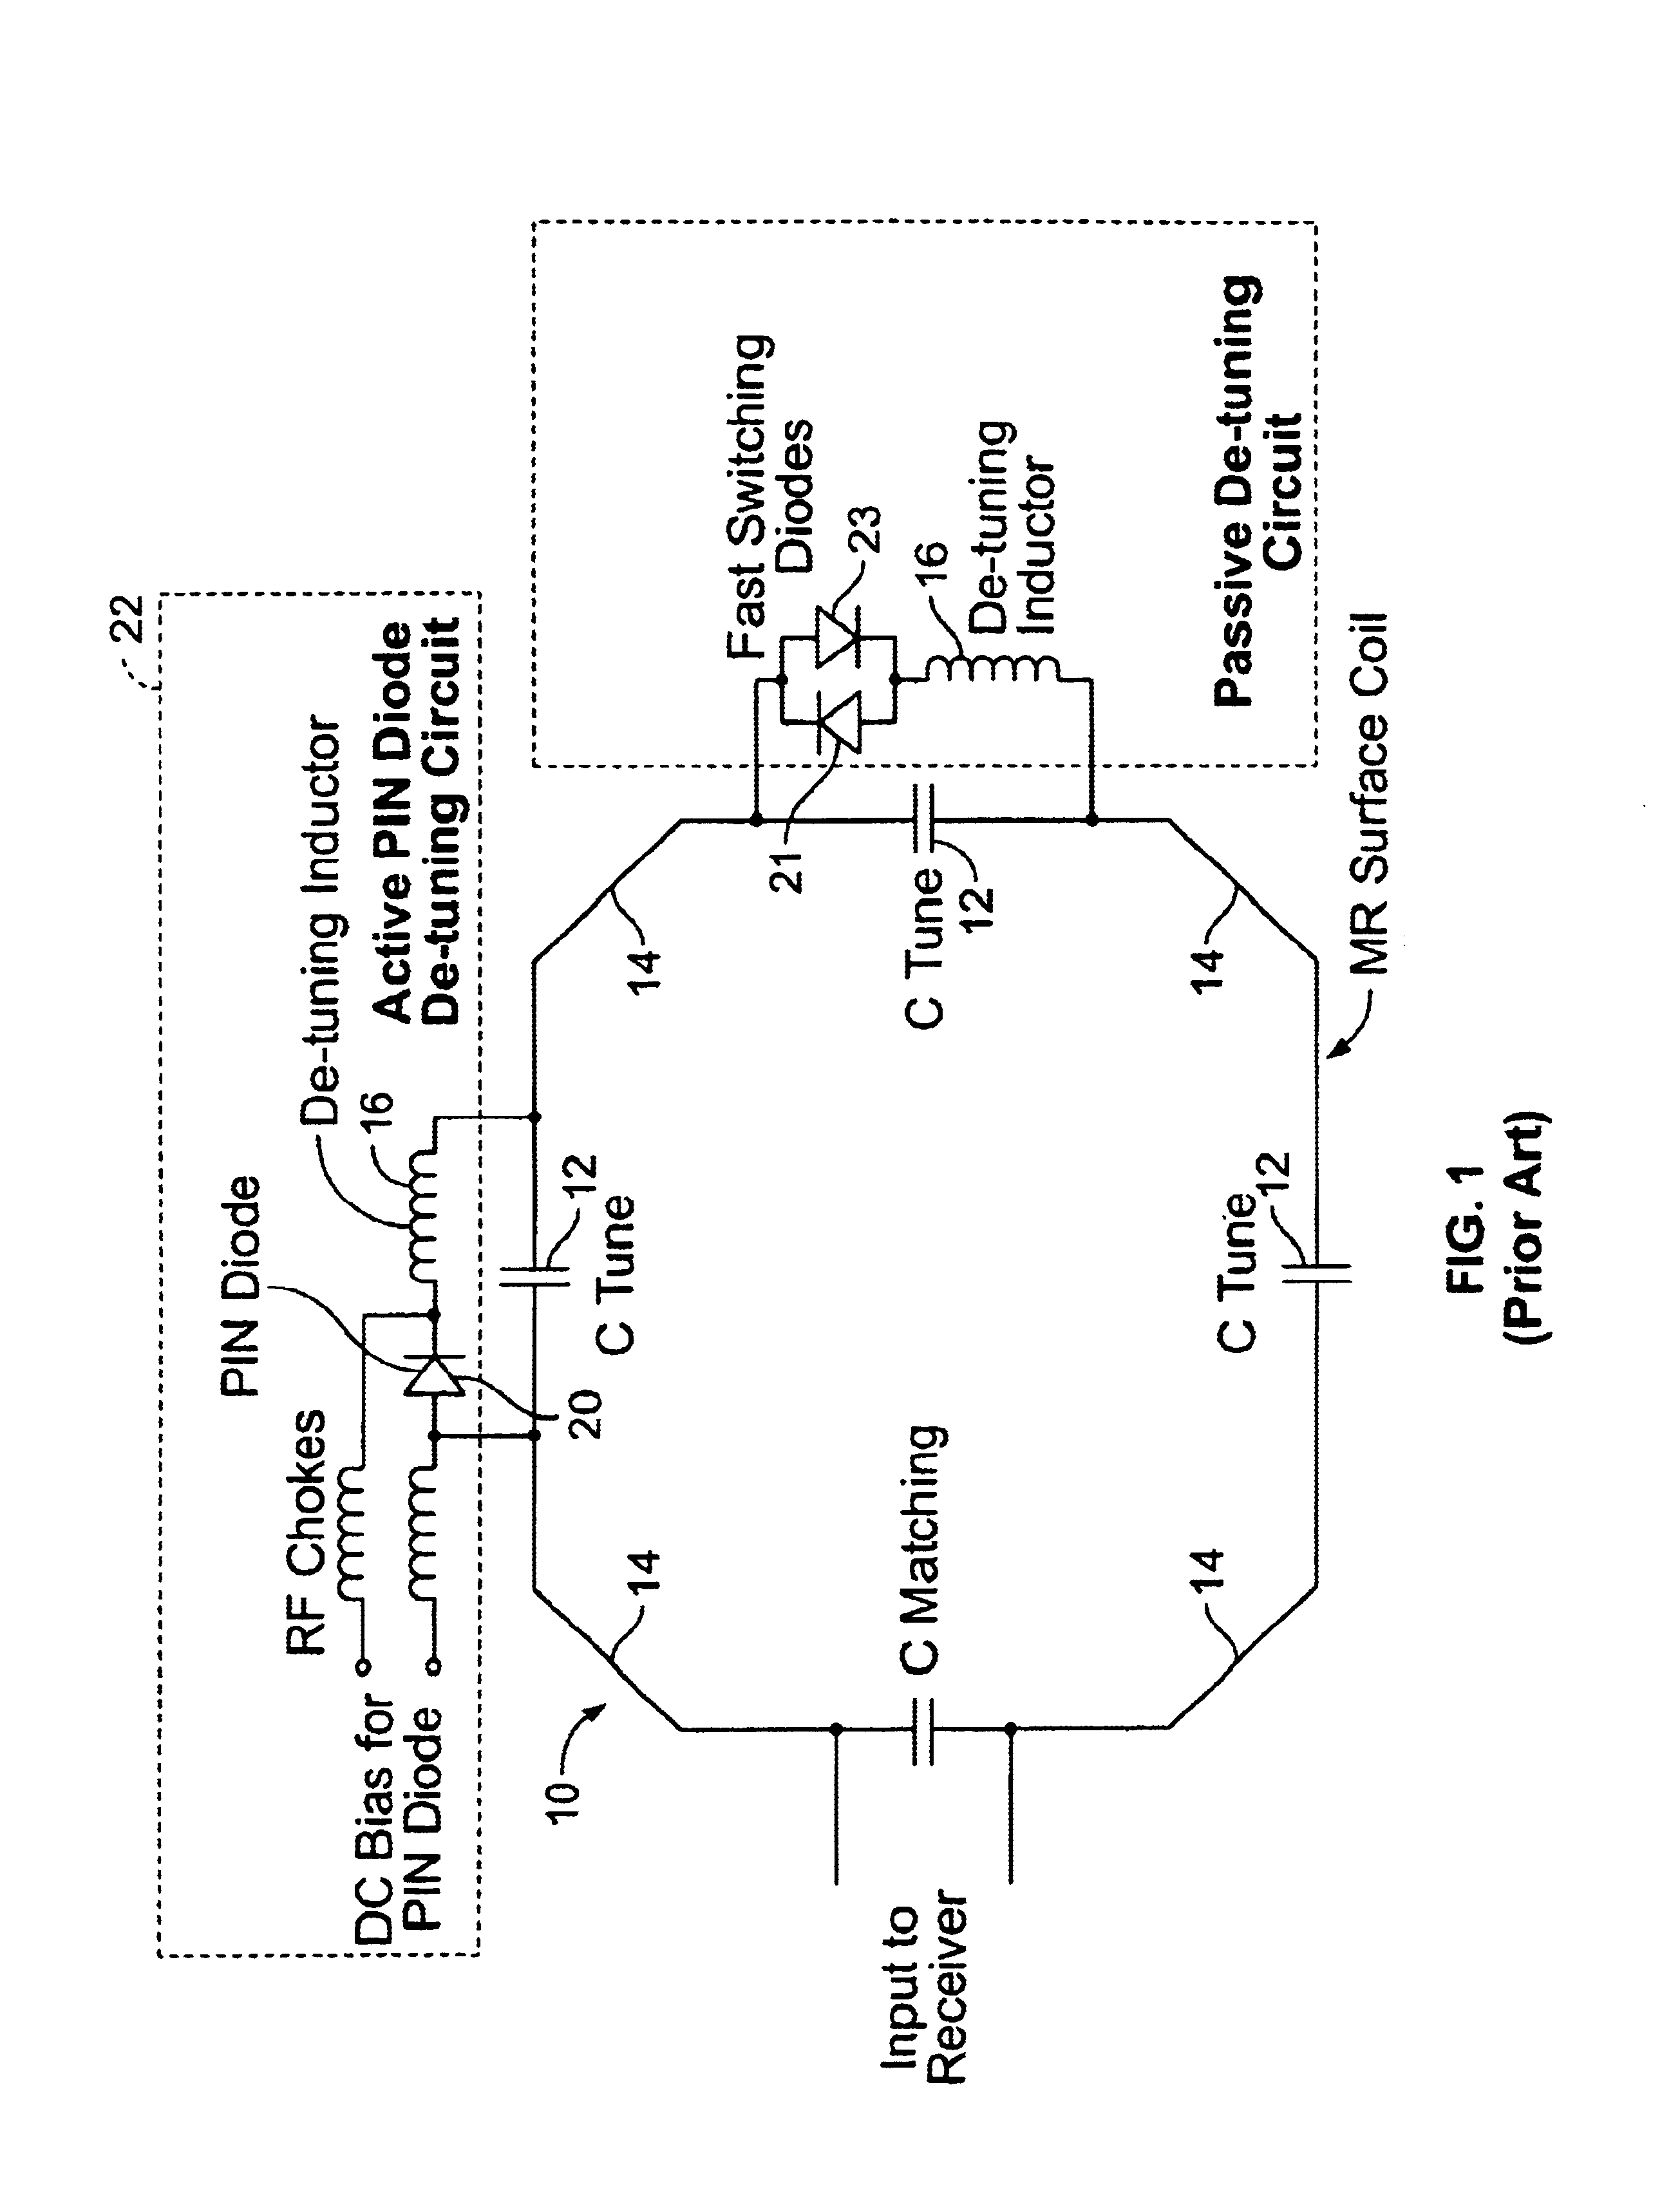 Transmit mode coil detuning for MRI systems